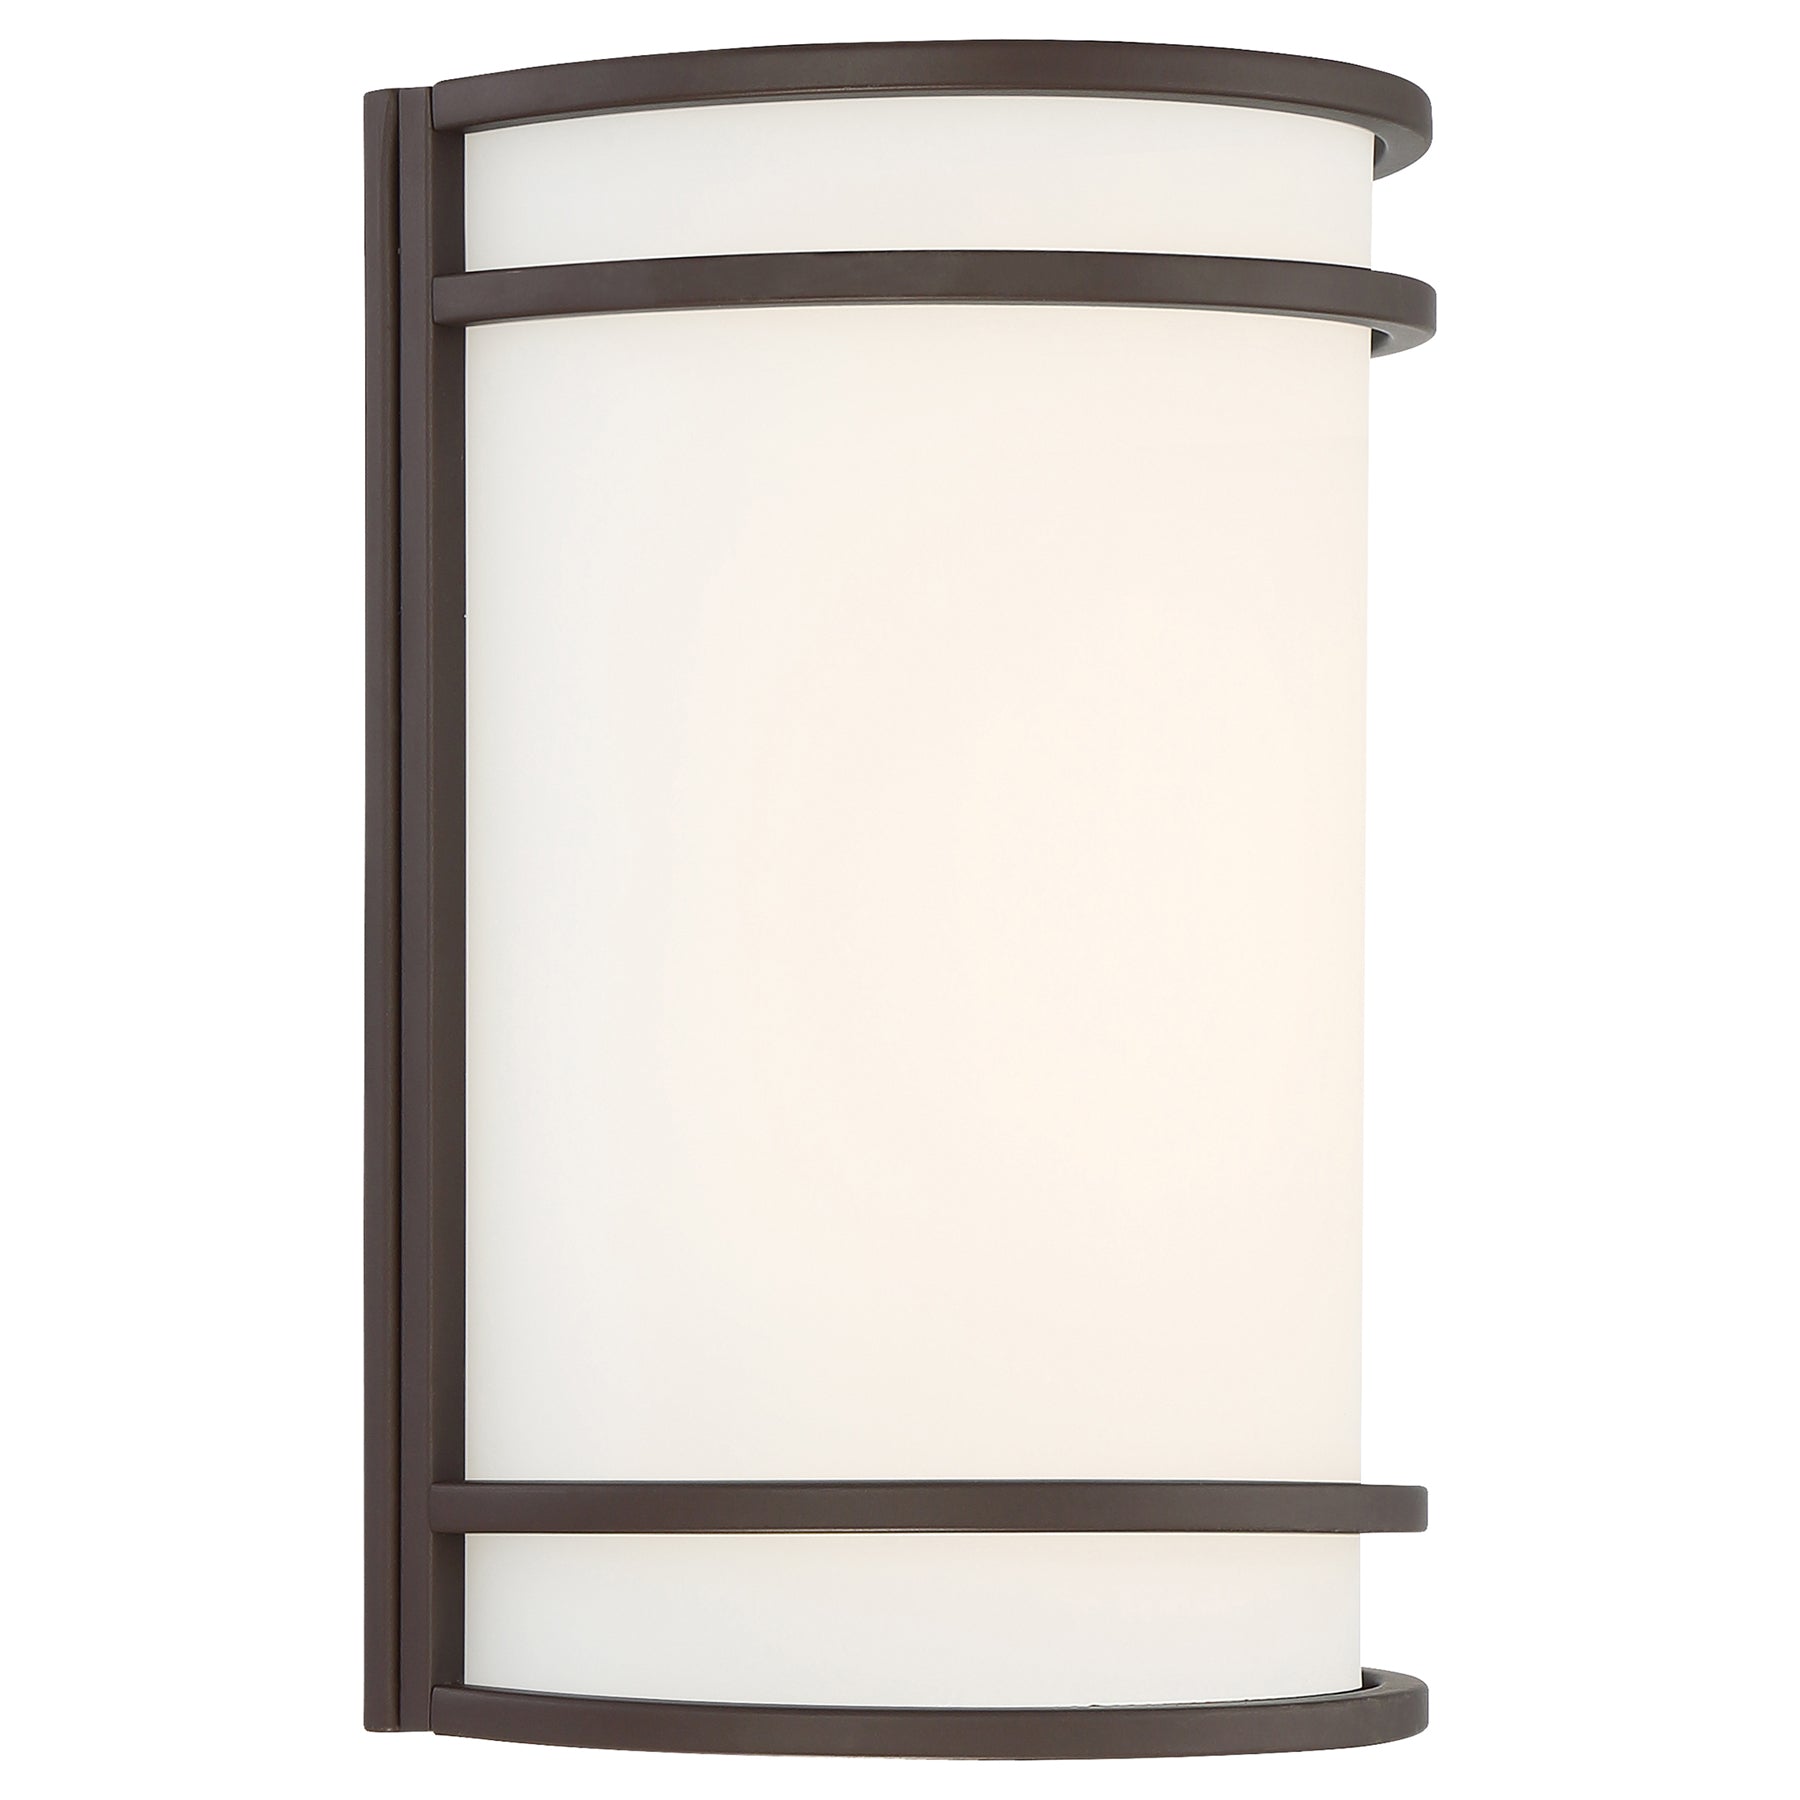 Lola 10in. LED Wall Sconce Lighting (Bronze)